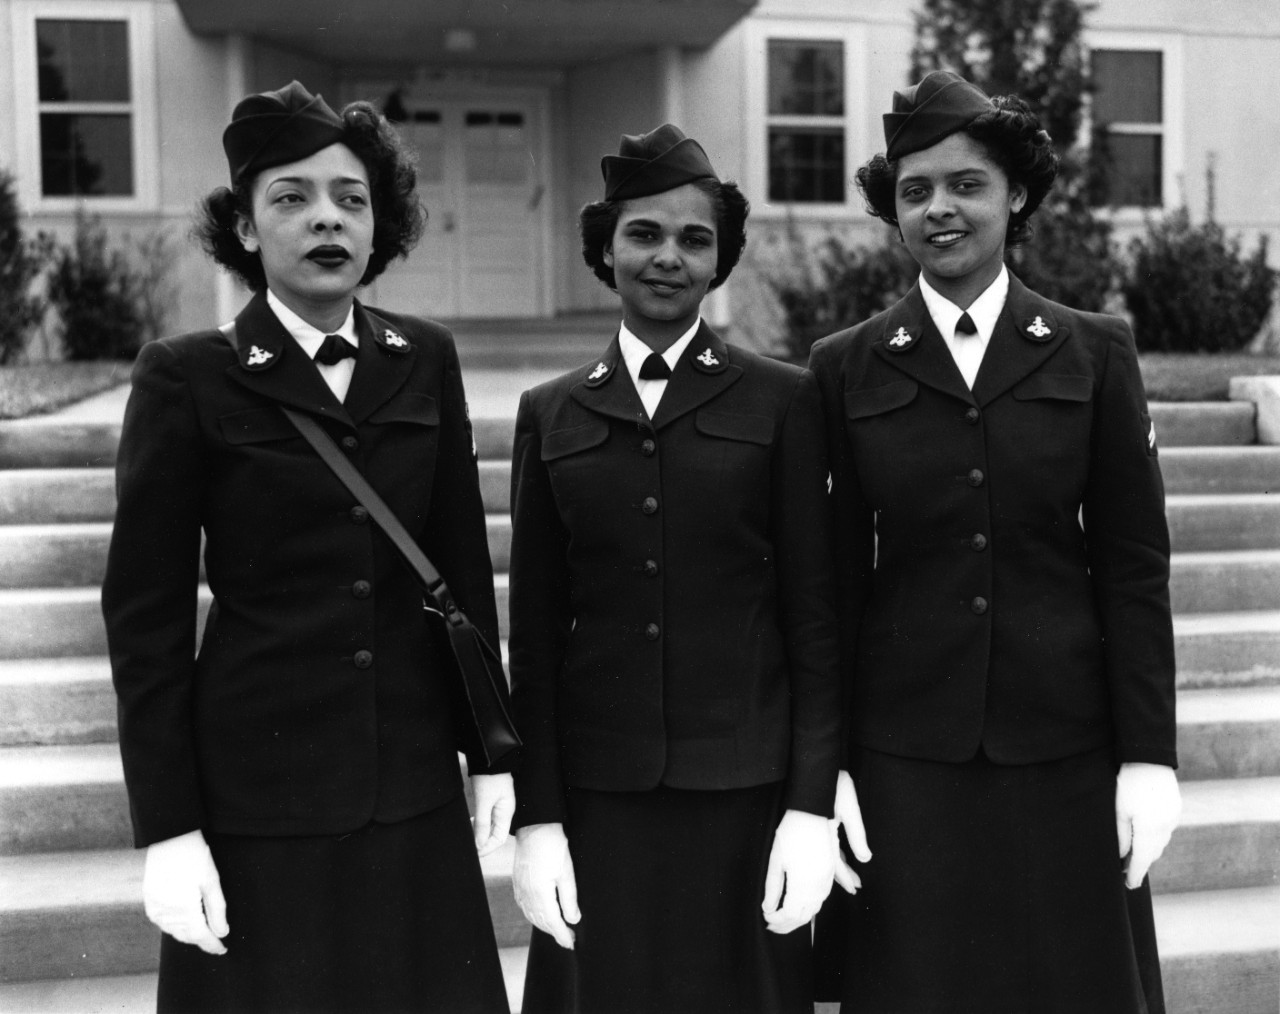 Hospital Apprentices (Left to Right: Ruth C. Isaacs, Katherine Horton, Inez Patterson) are the first African-American WAVES to enter the Hospital Corps School at the National Naval Medical Center, Bethesda, Maryland. 